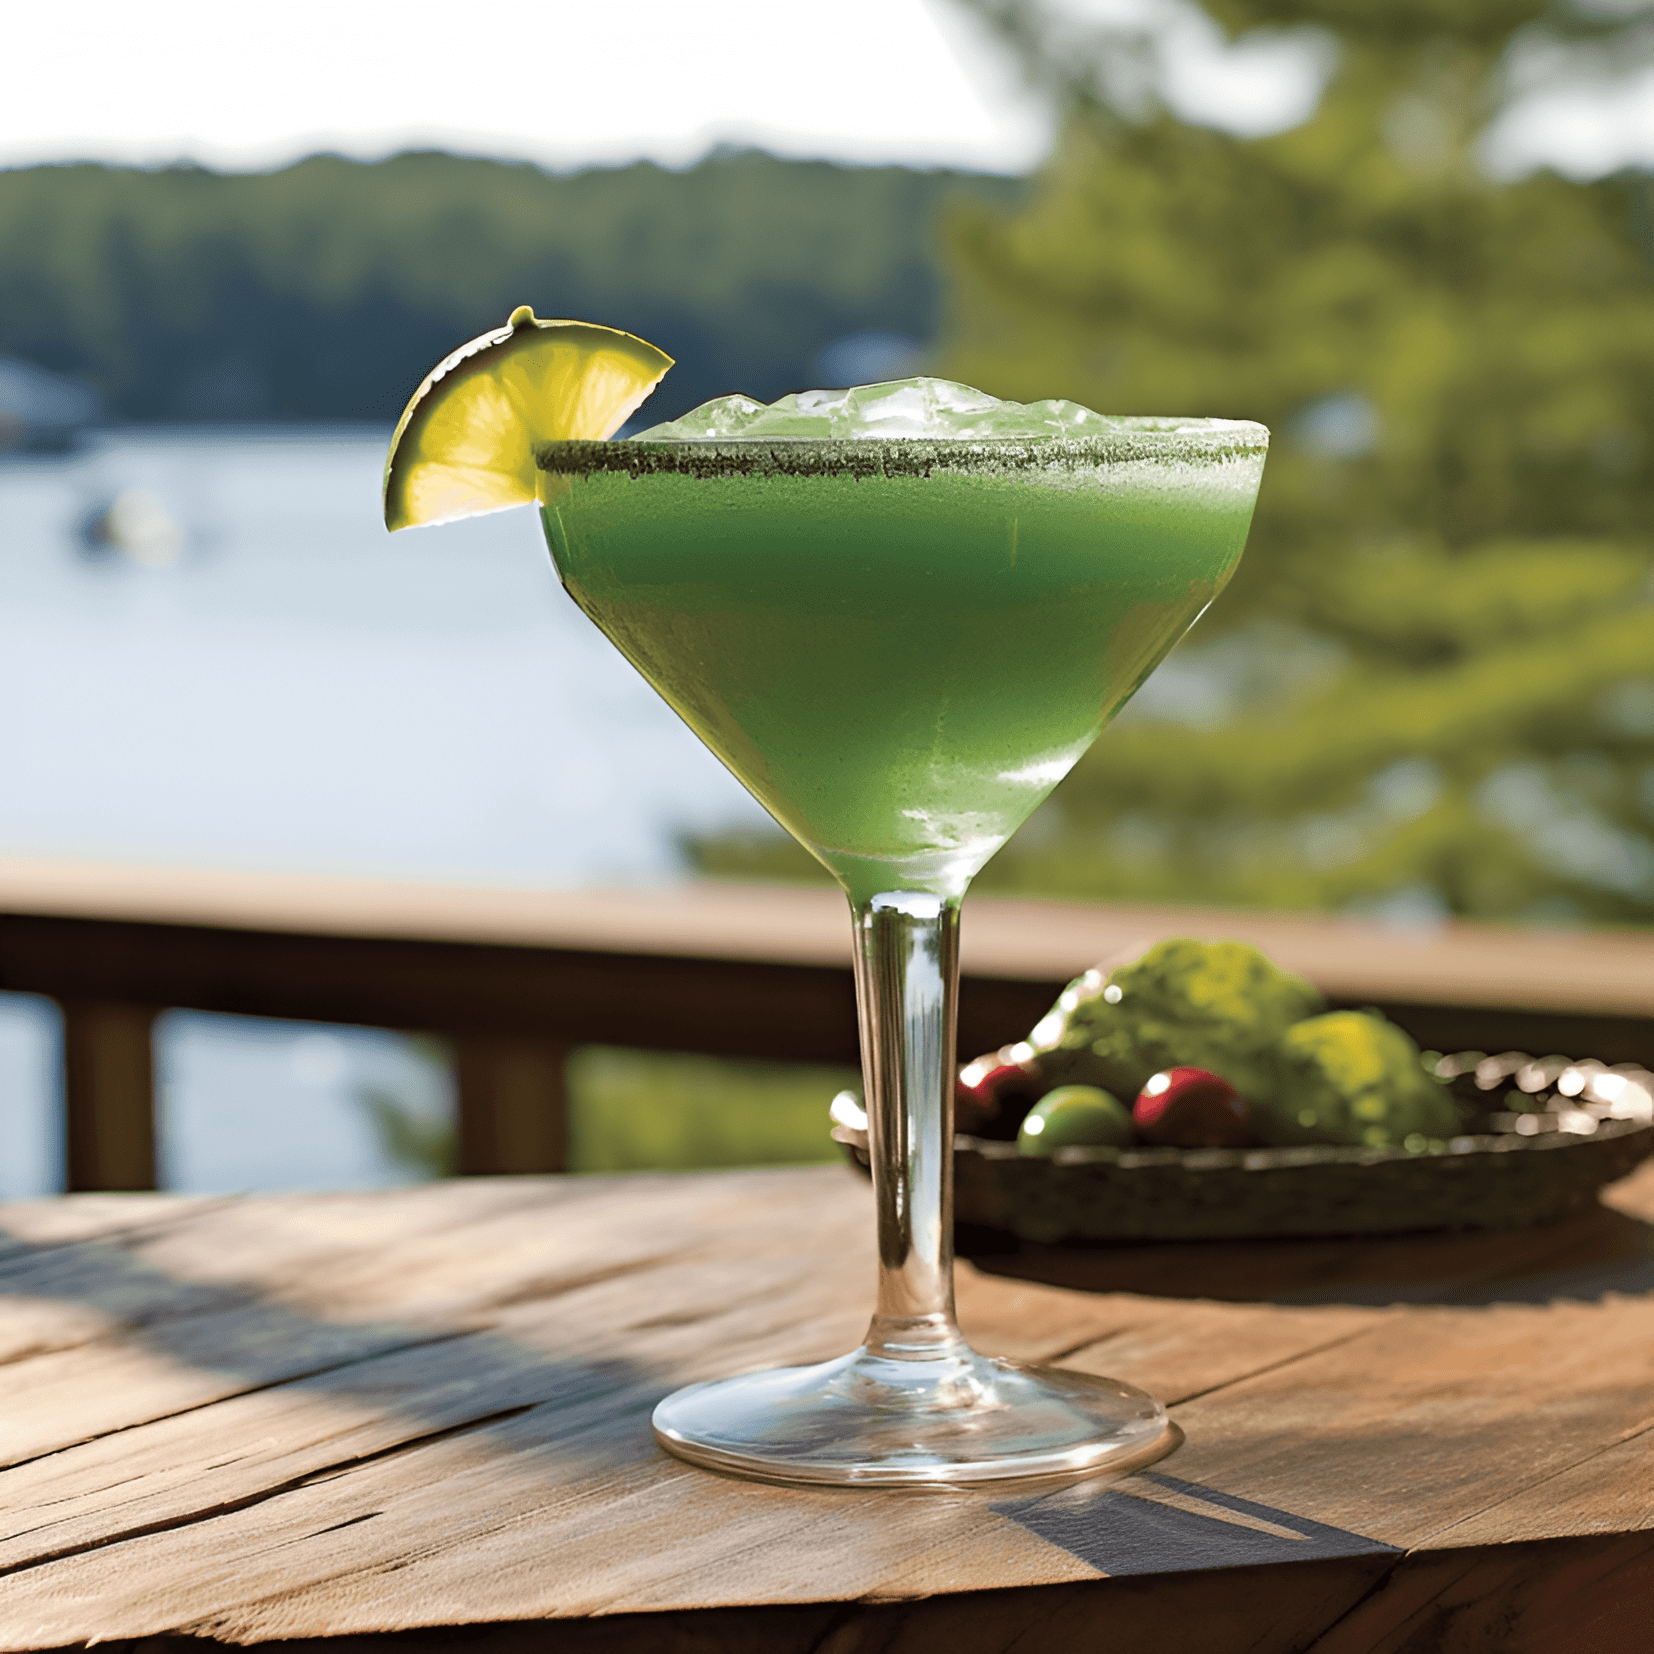 Frozen Daiquiri Cocktail Recipe - The Frozen Daiquiri is a refreshing, sweet, and tangy cocktail with a smooth, slushy texture. The combination of rum, lime juice, and sugar creates a perfect balance of flavors, making it an ideal summer drink.